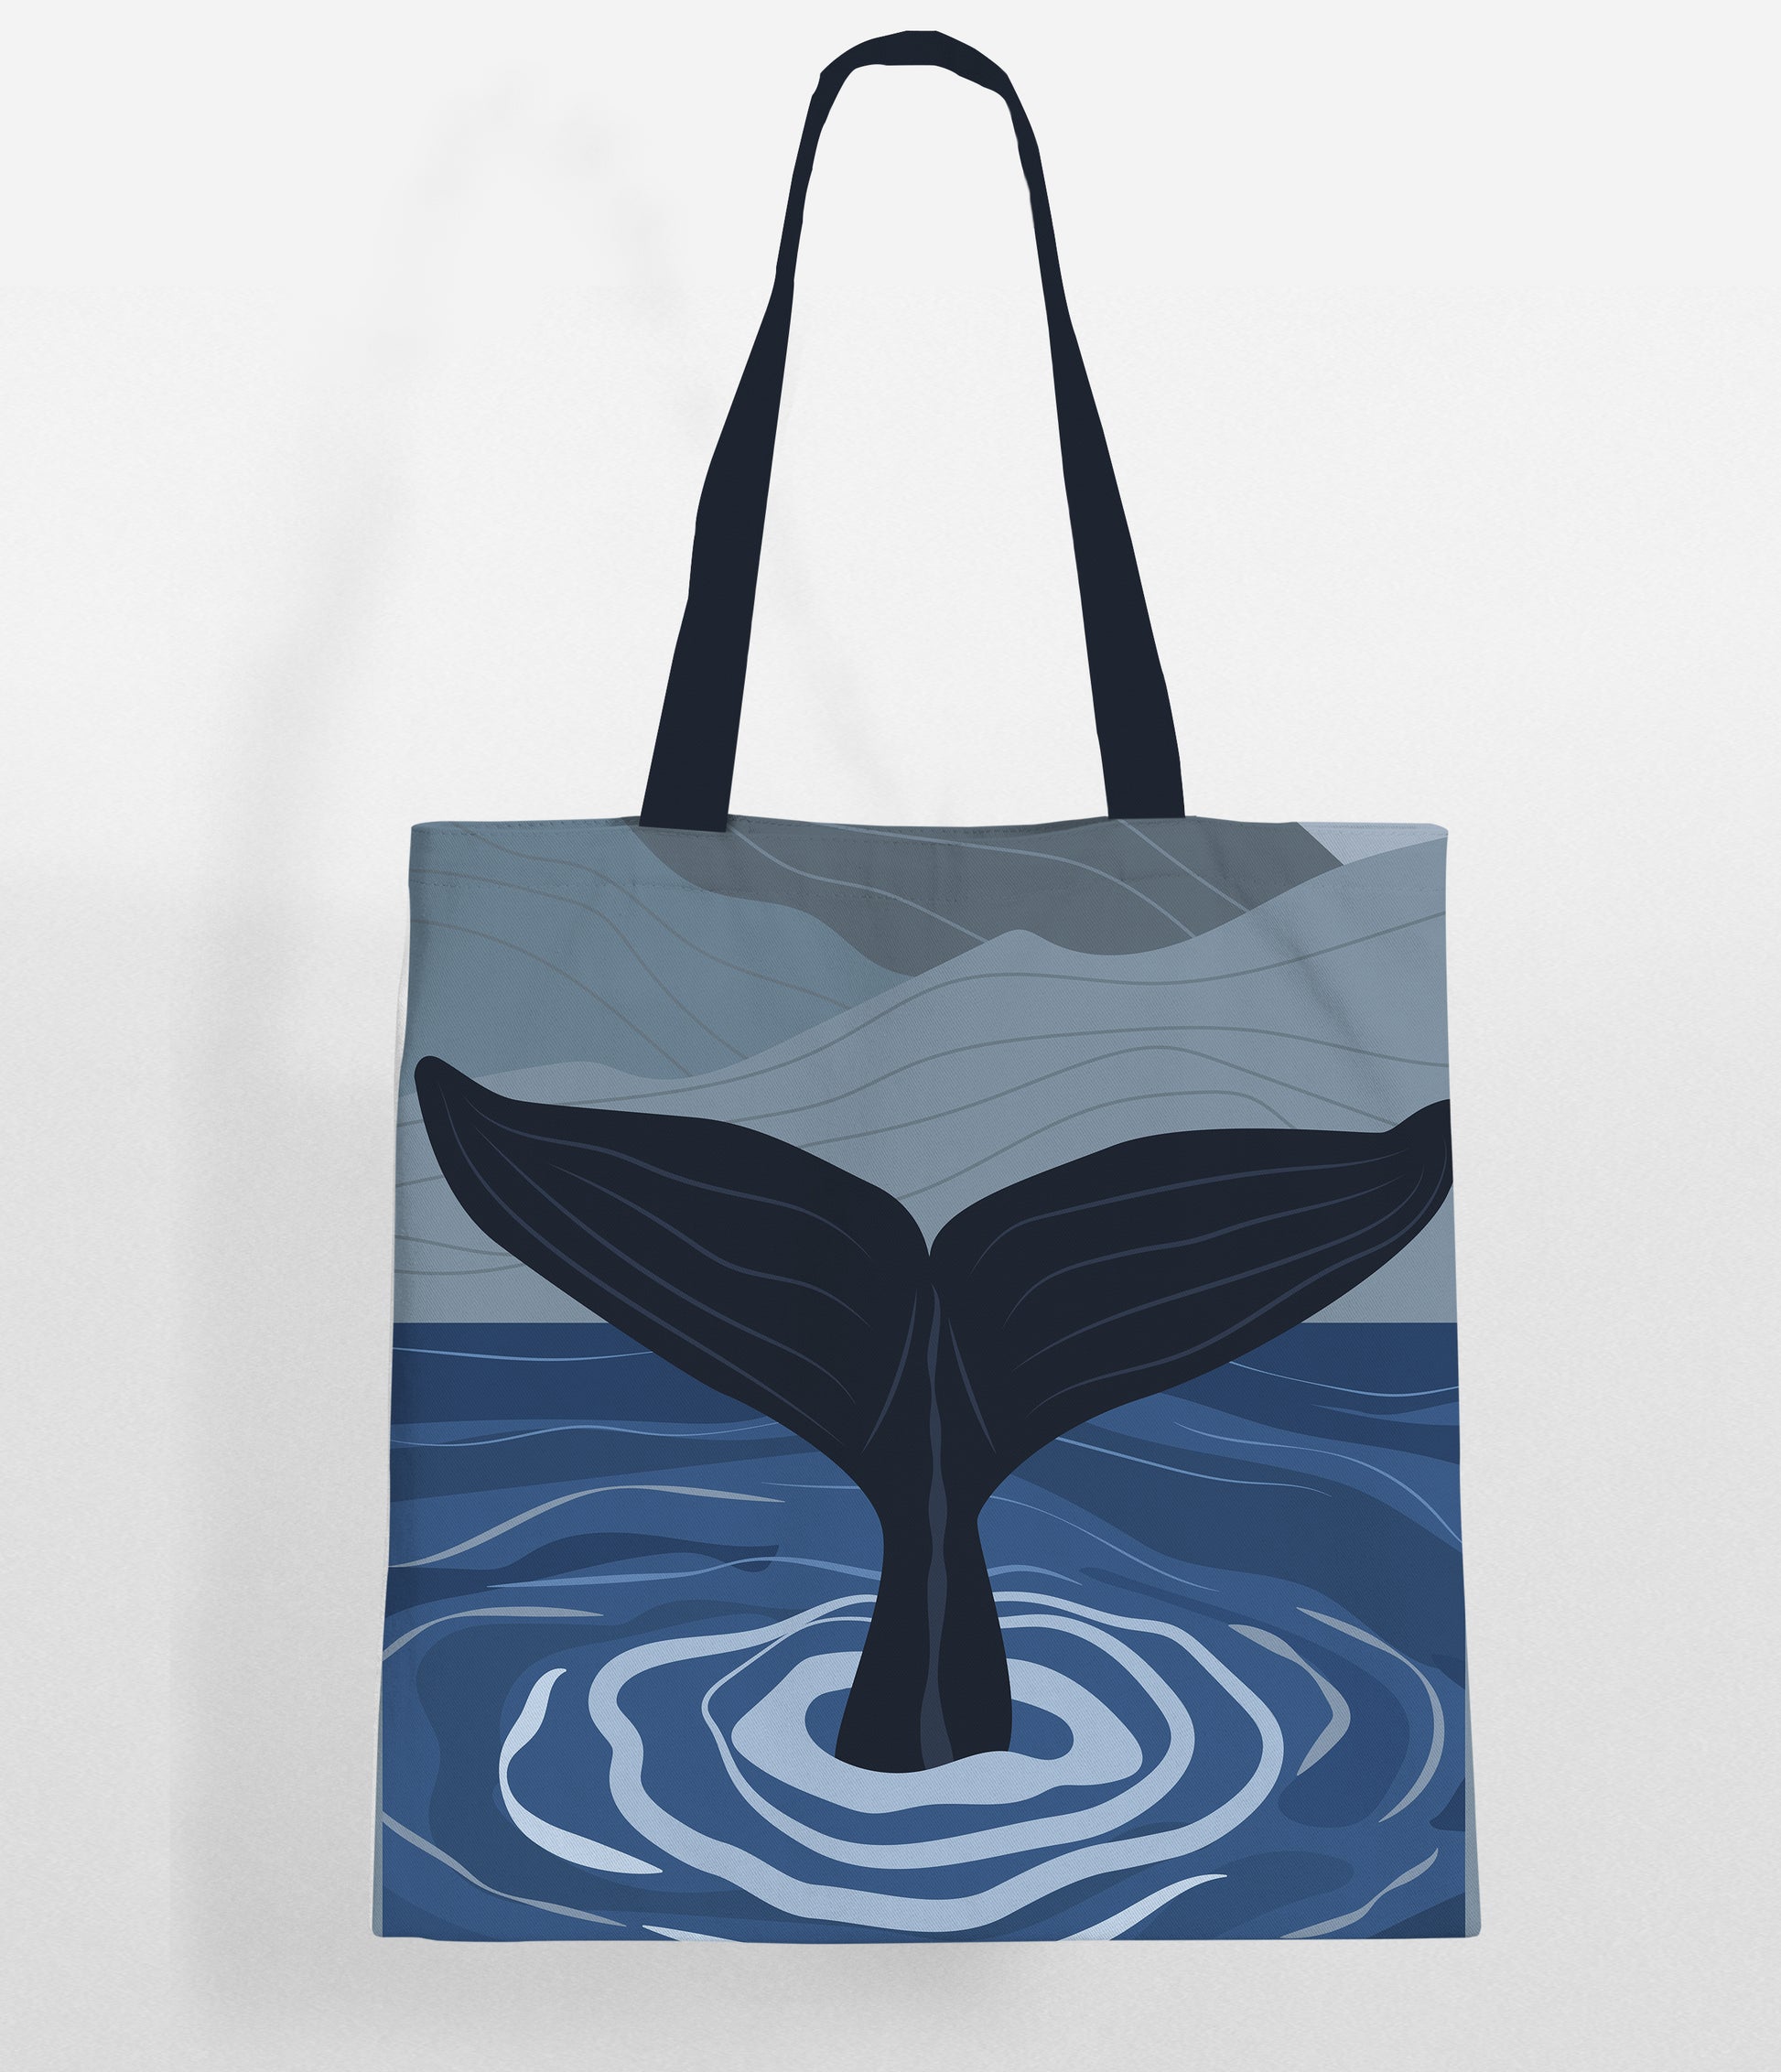 Blue whale tail diving inside the ocean and blue sky above tote bag